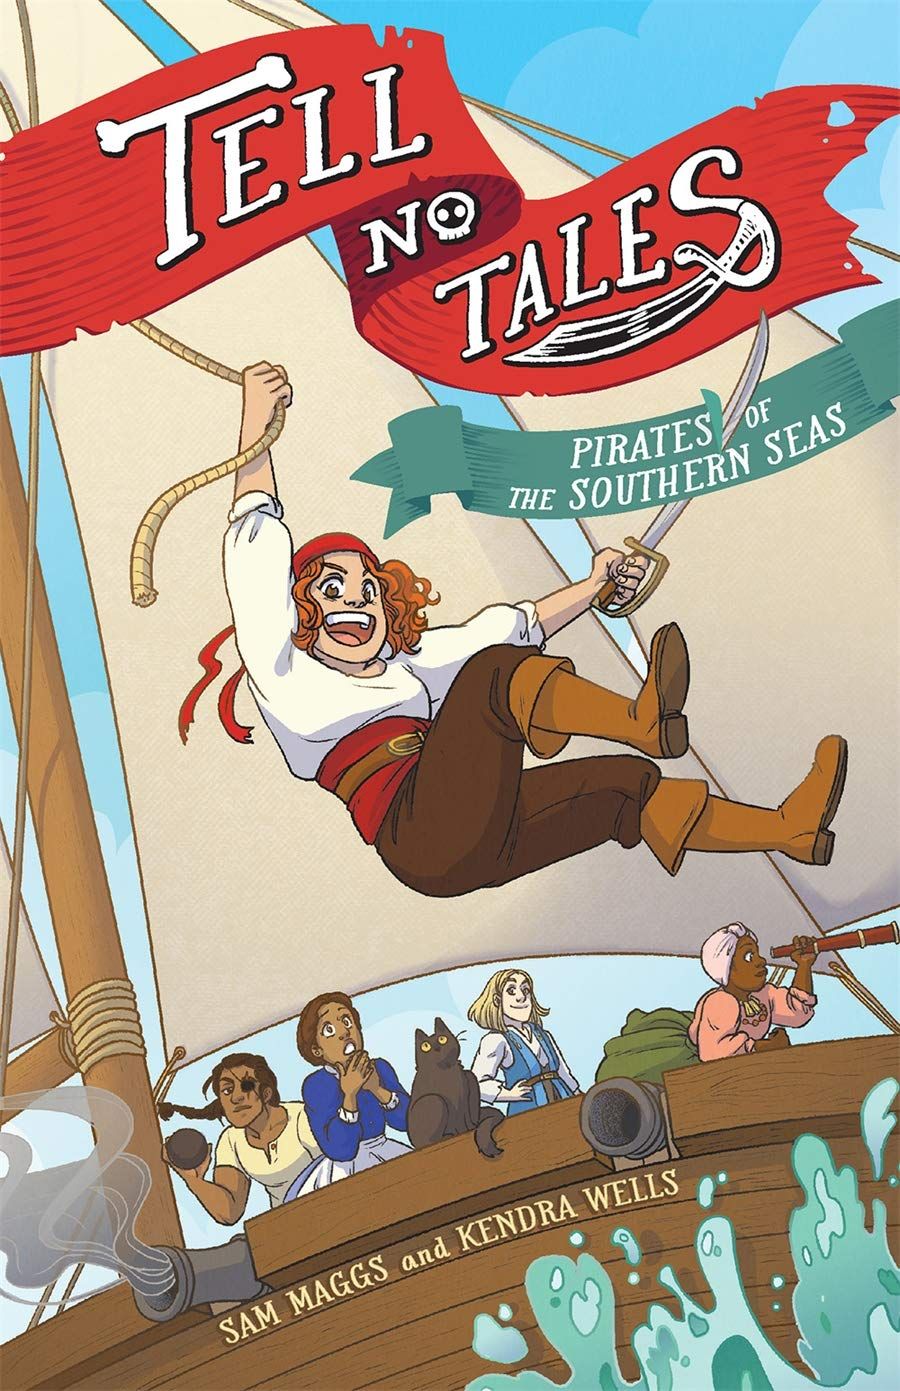 Tell No Tales: Pirates of the Southern Seas by Sam Maggs and Kendra Wells